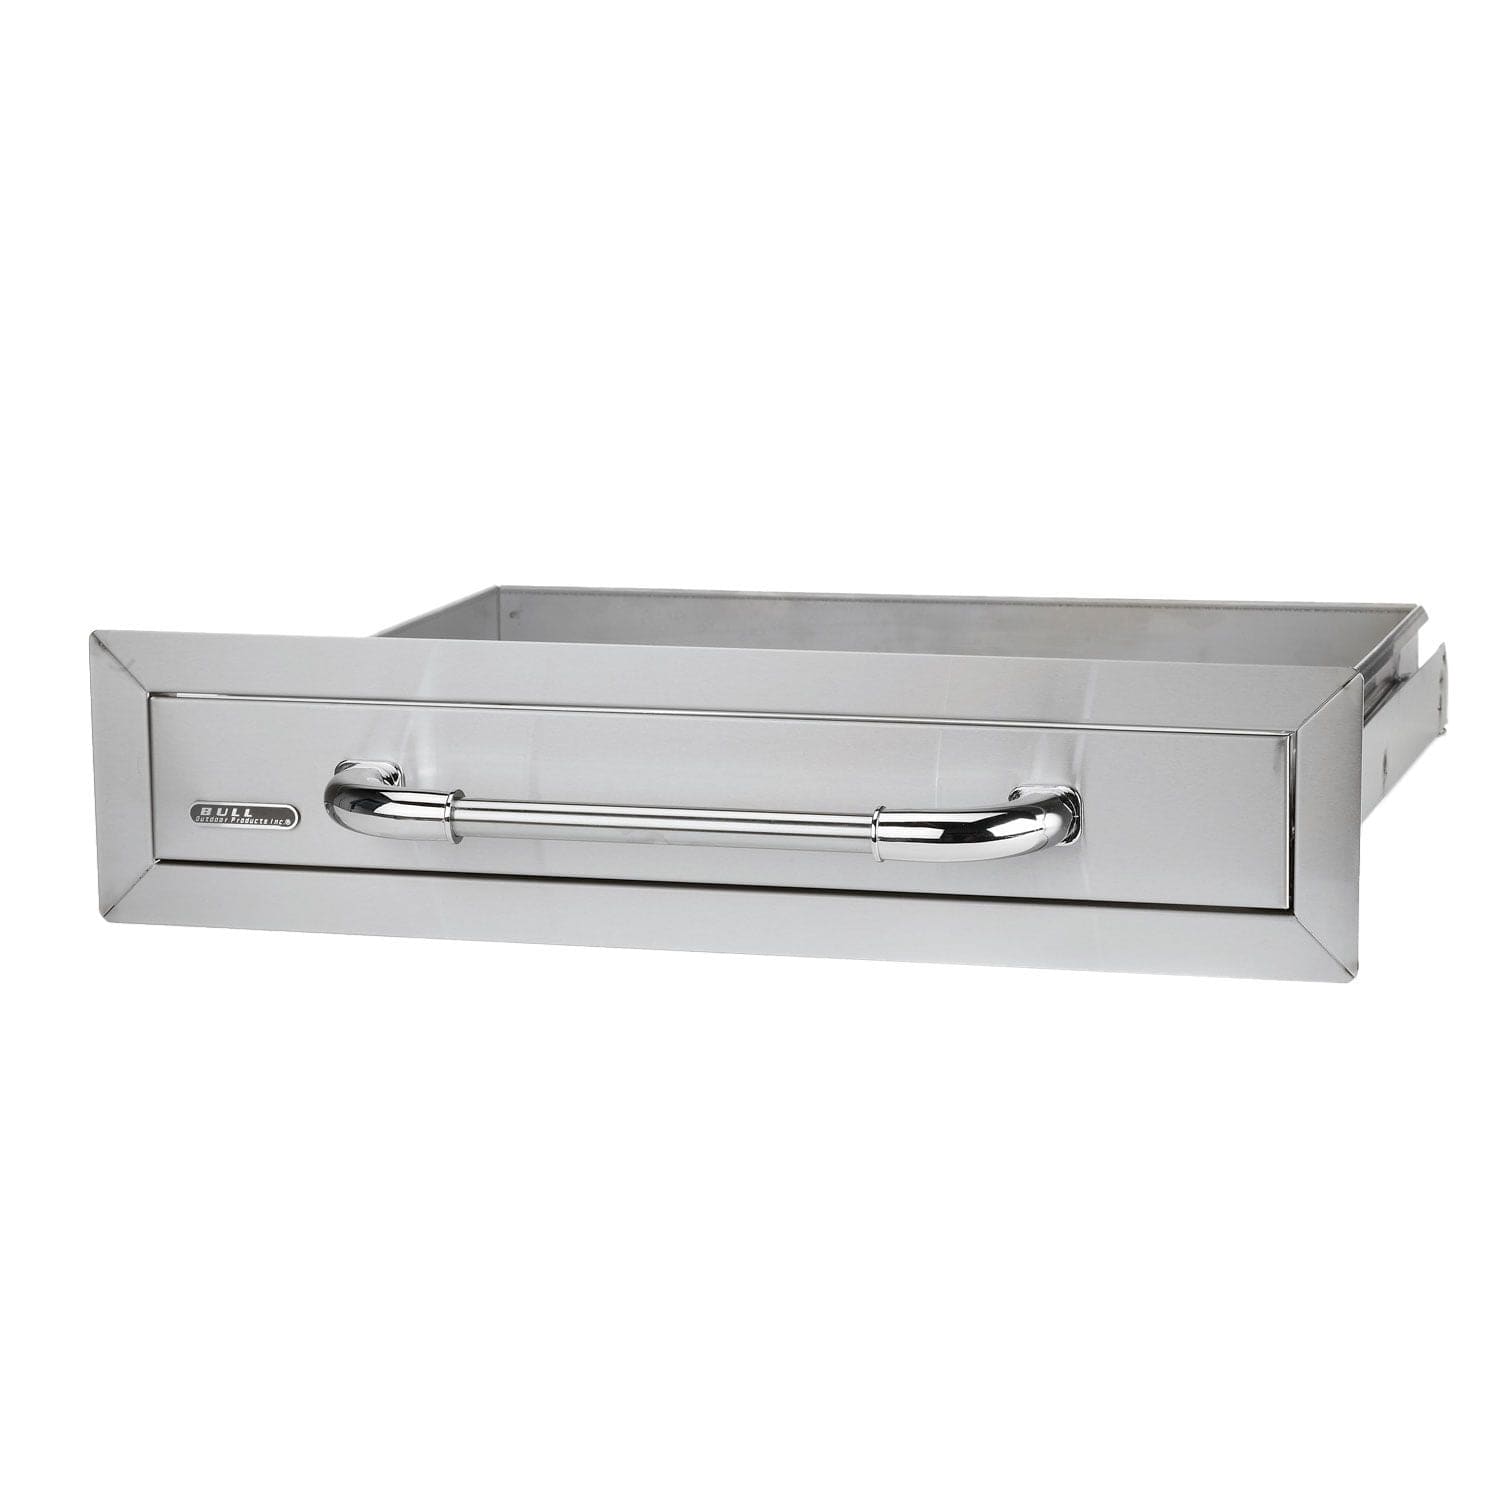 Bull Grills Bull Grills - Slide-Out Single Drawer, 25.5x6-Inches - 09970